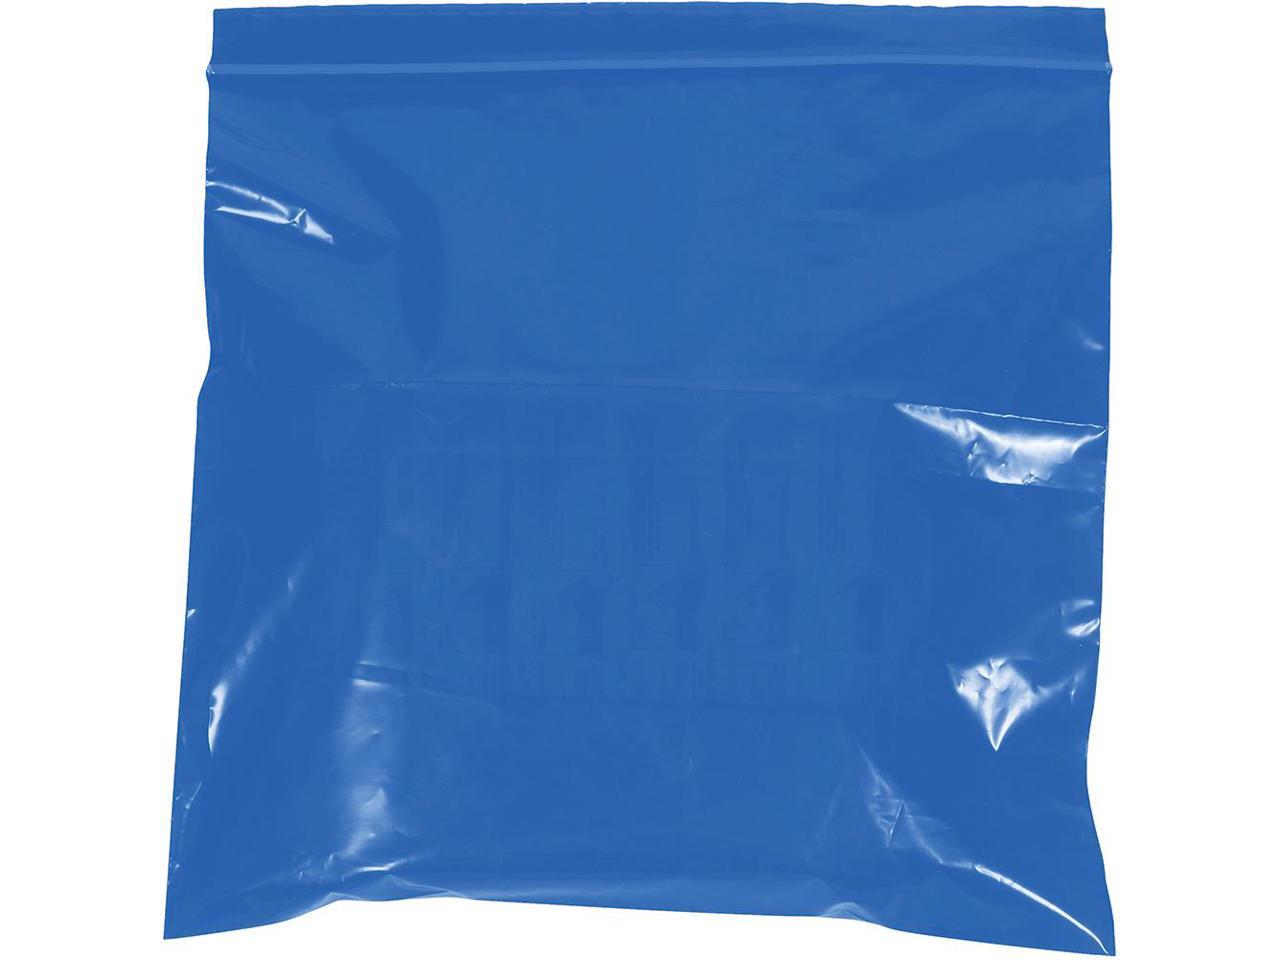 "Flat 2 Mil Poly Bags 1000/Case" Clear 5"" x 10"" 